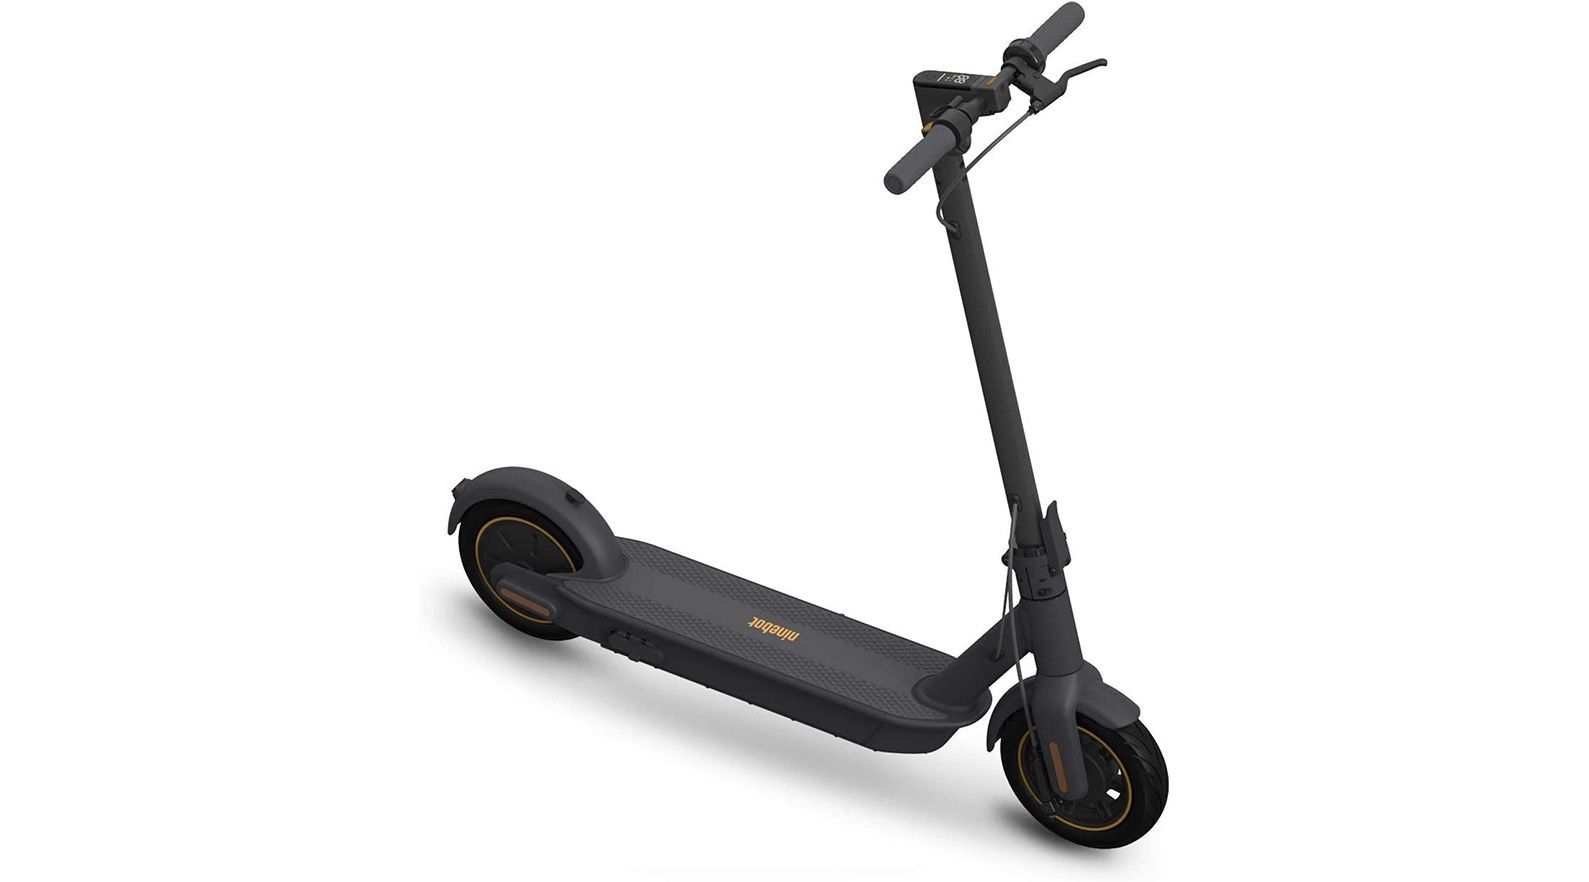 Save 30% on a Segway electric scooter for Black Friday